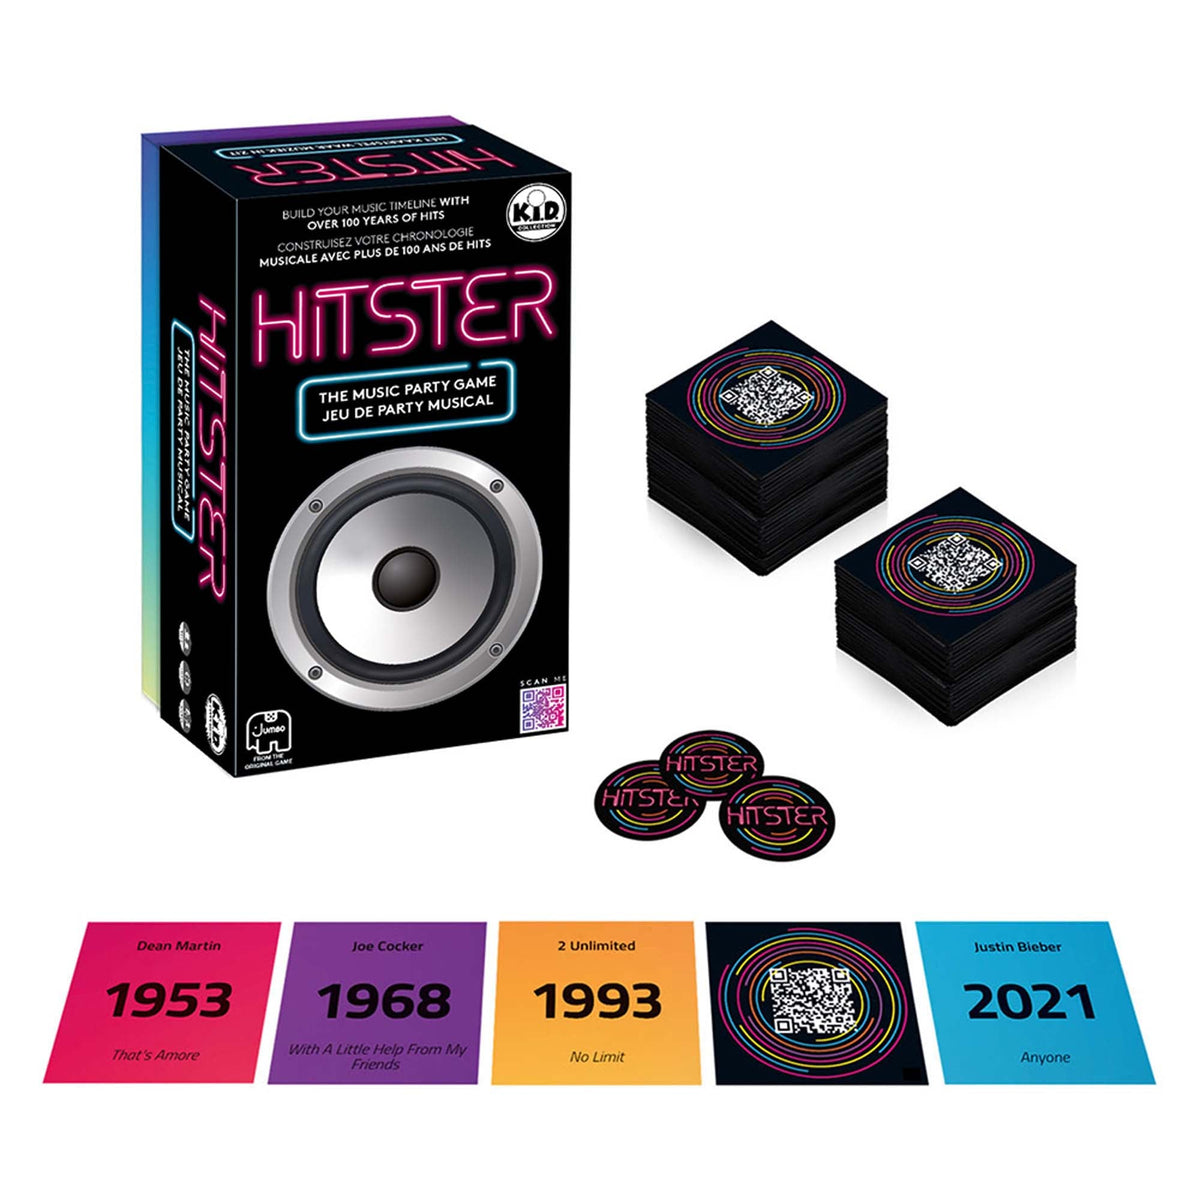 JOUET K.I.D. INC. Toys & Games Hitster: The Musical Party Game, 1 Count